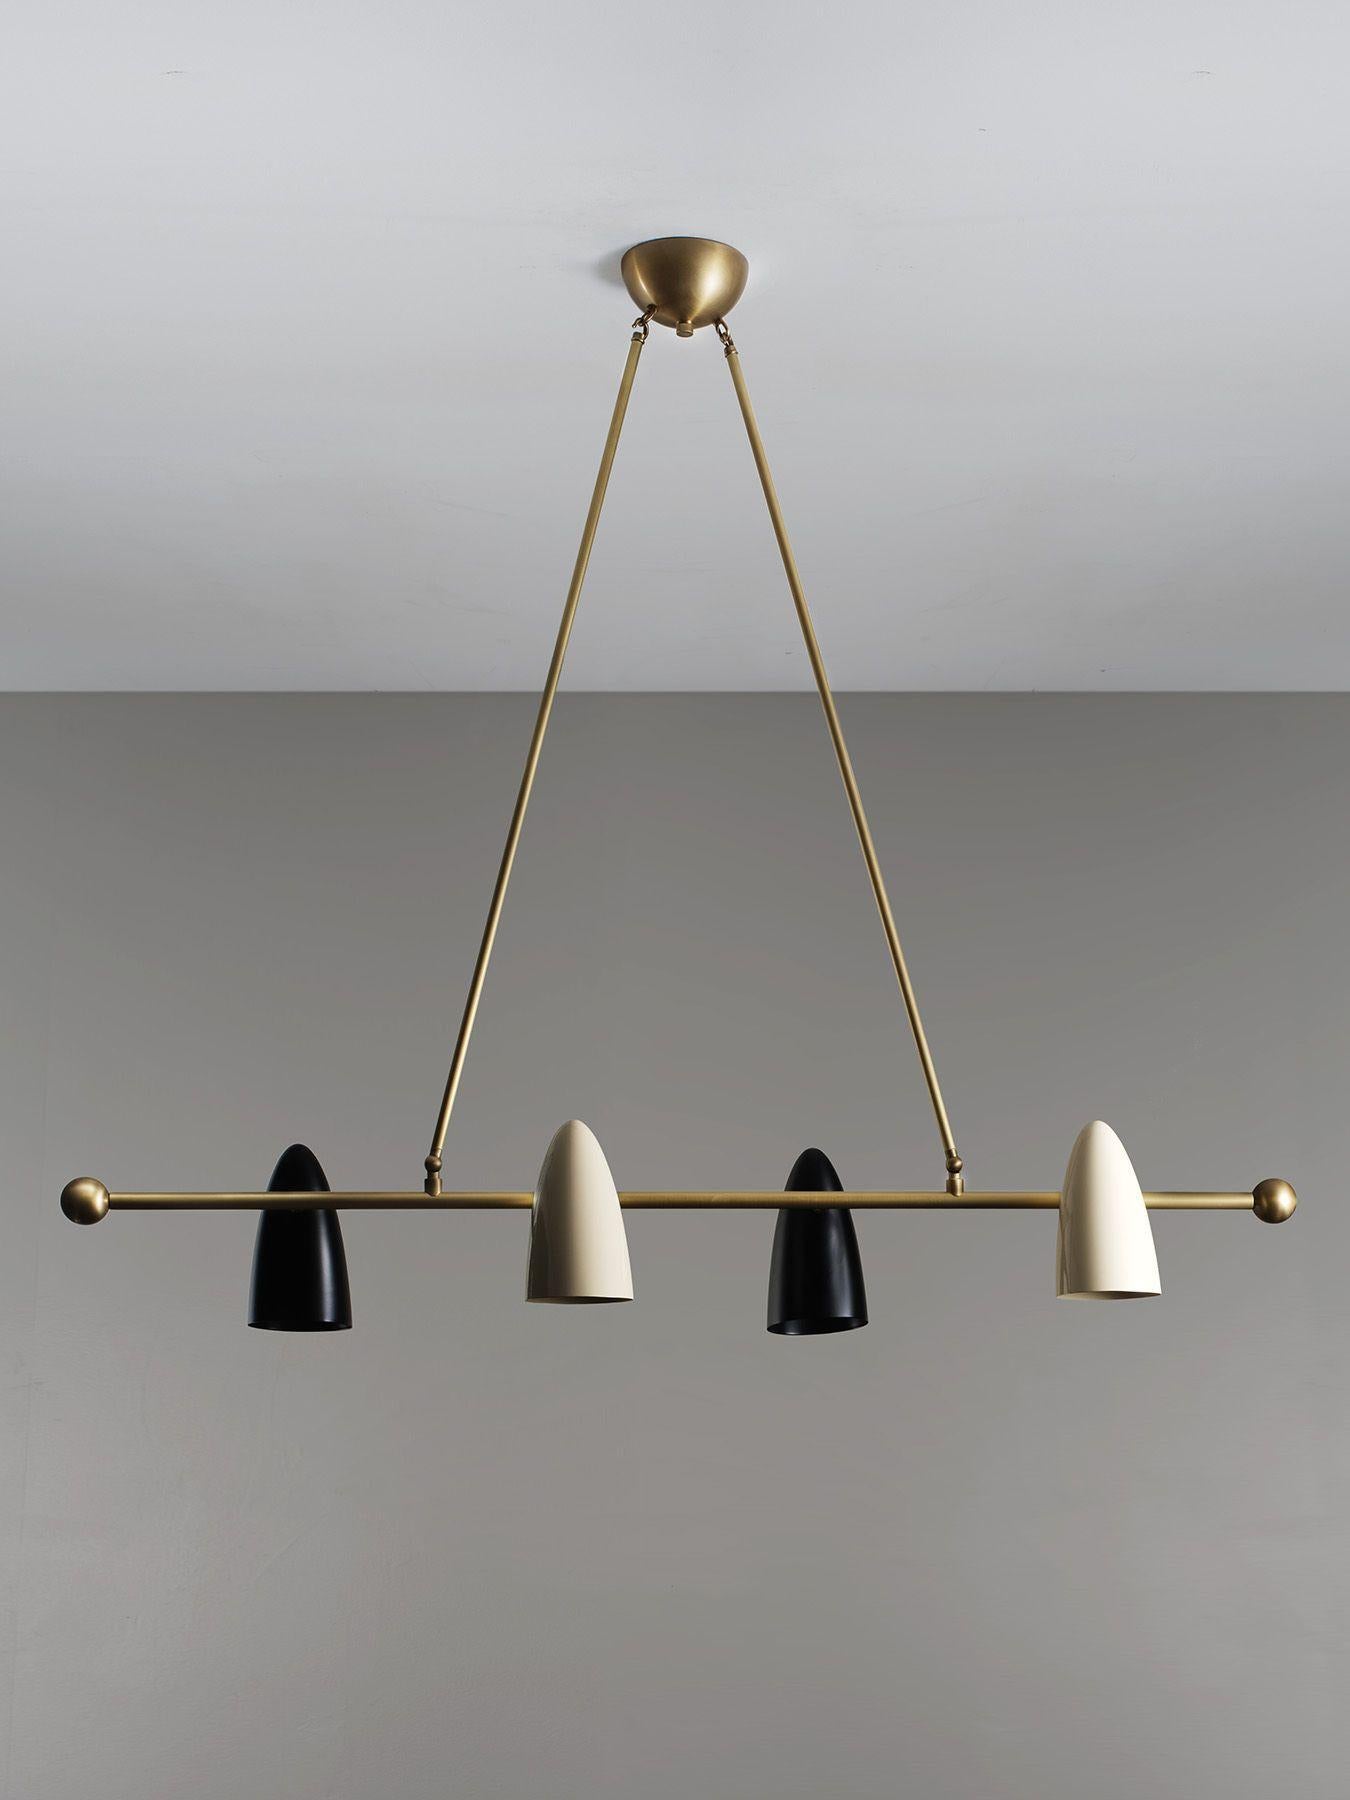 American CALYX Chandelier in Black & Cream Enamel and Brass by Blueprint Lighting 2021 For Sale